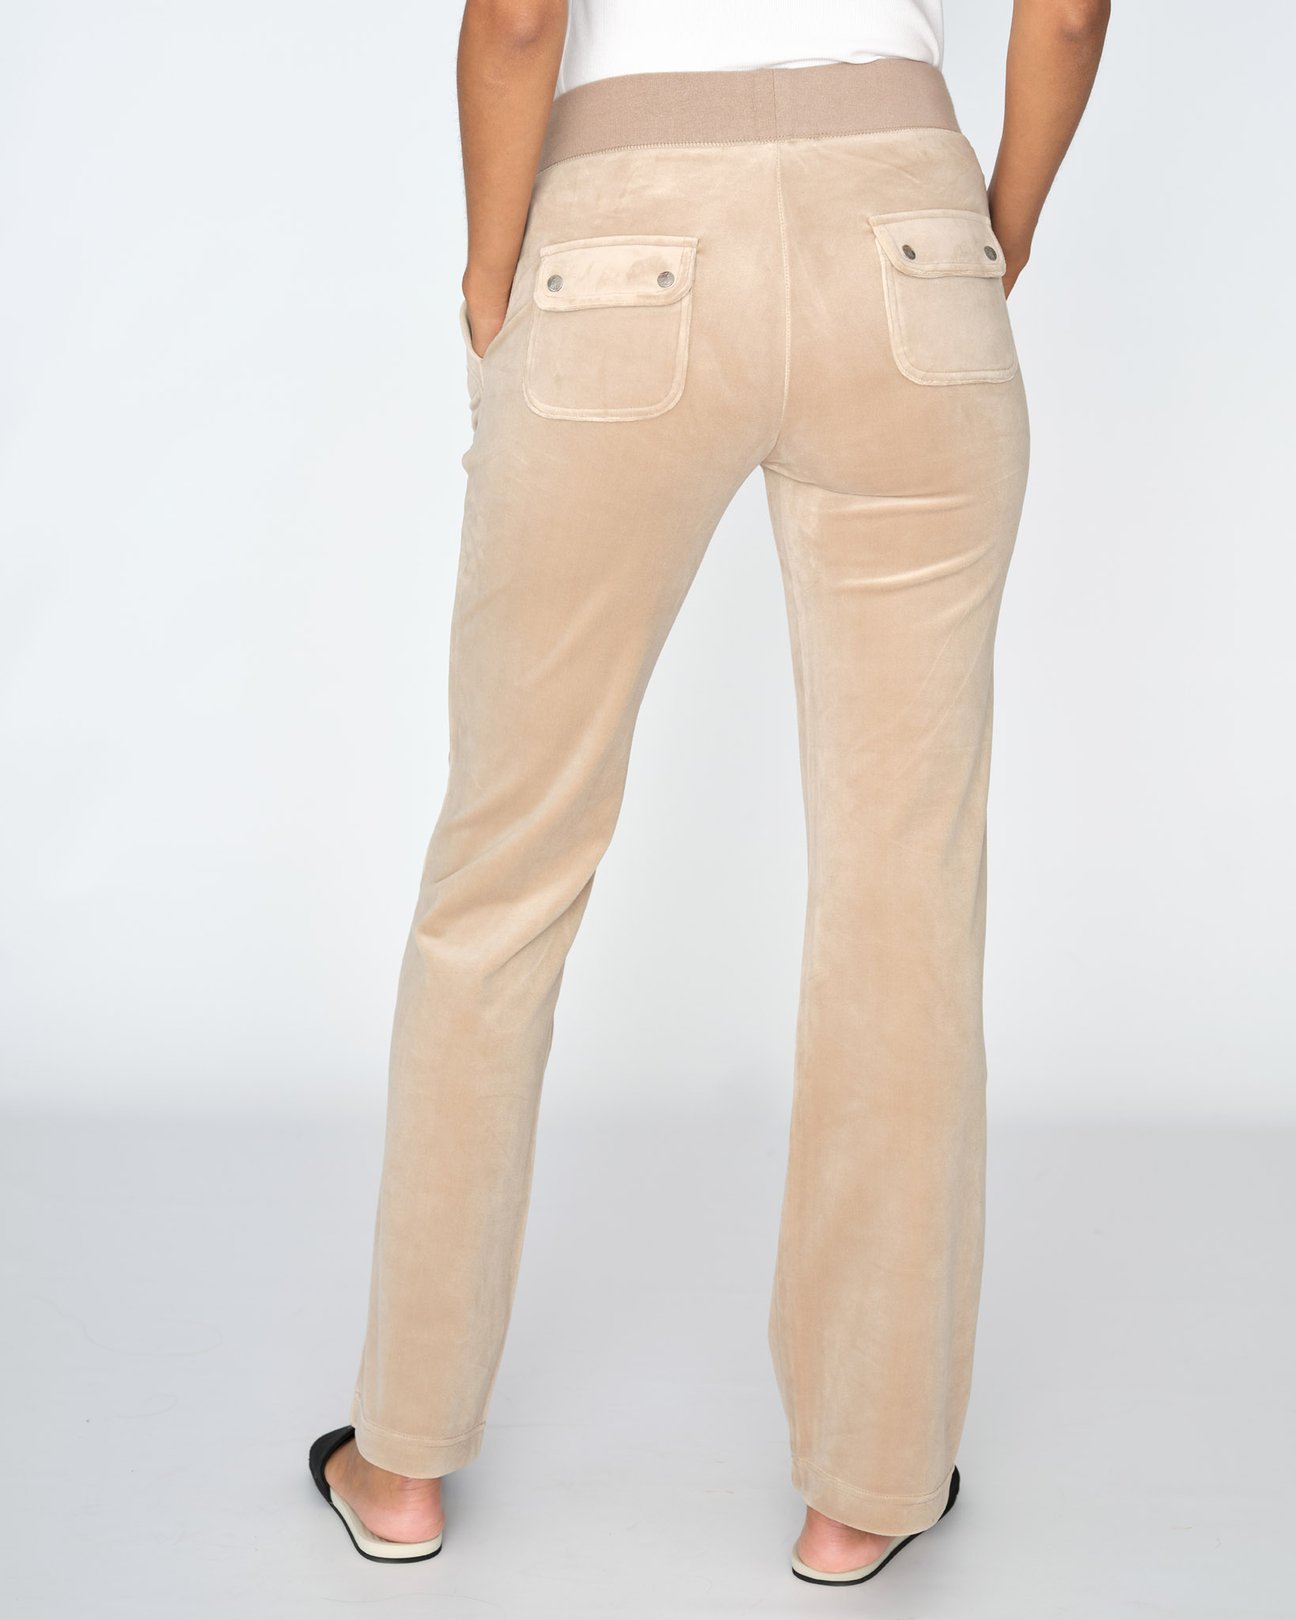 Juicy Couture - Classic Velour Del Ray Pant - Warm Taupe